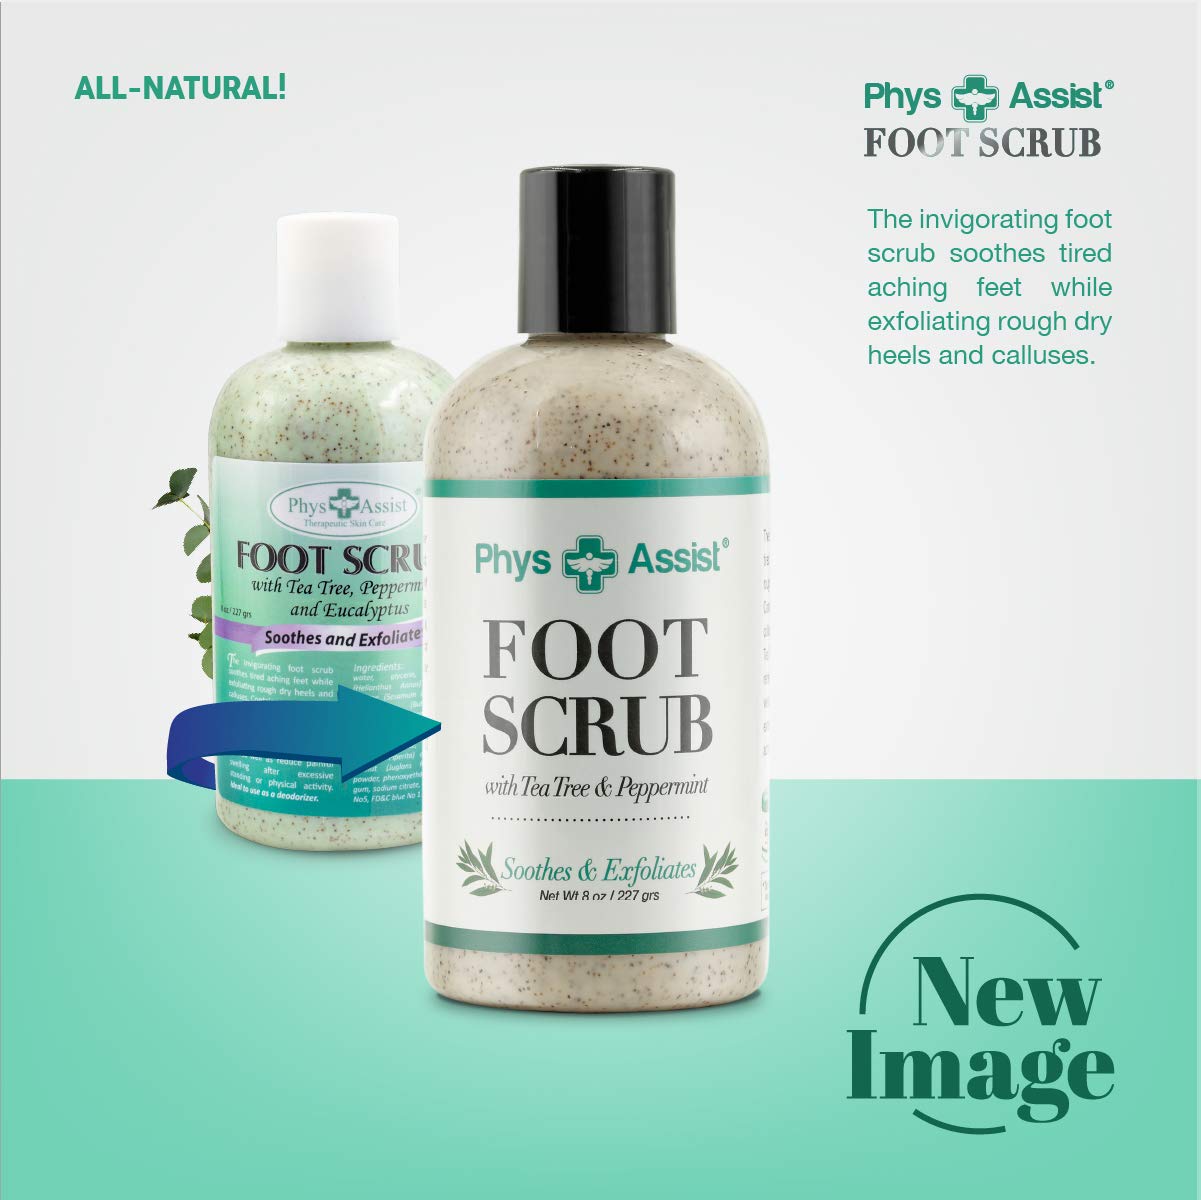 PhysAssist Foot Scrub 8 oz. with Tea Tree, Peppermint Soothes and Exfoliates Promoting a Deep Cooling Sensation Leaving Feet Feeling Calm and Refreshed. : Beauty & Personal Care